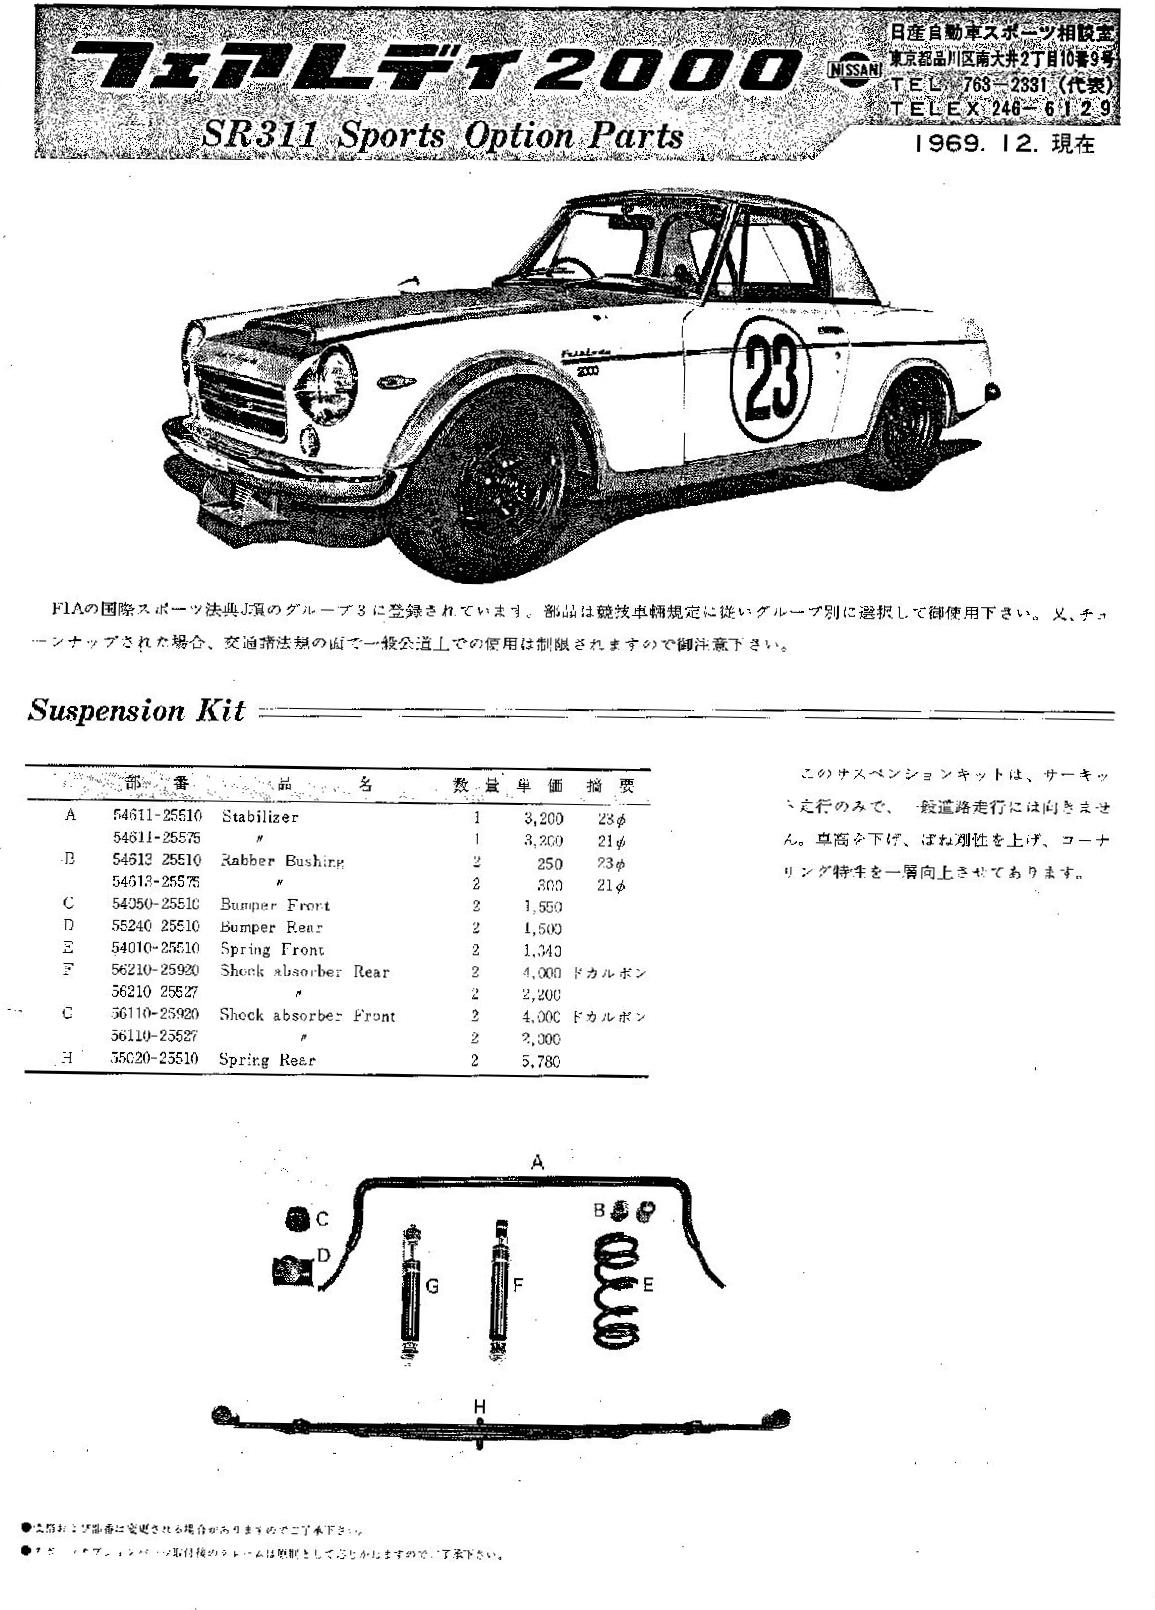 SR311 Fairlady Roadster racing parts catalog from 1969!